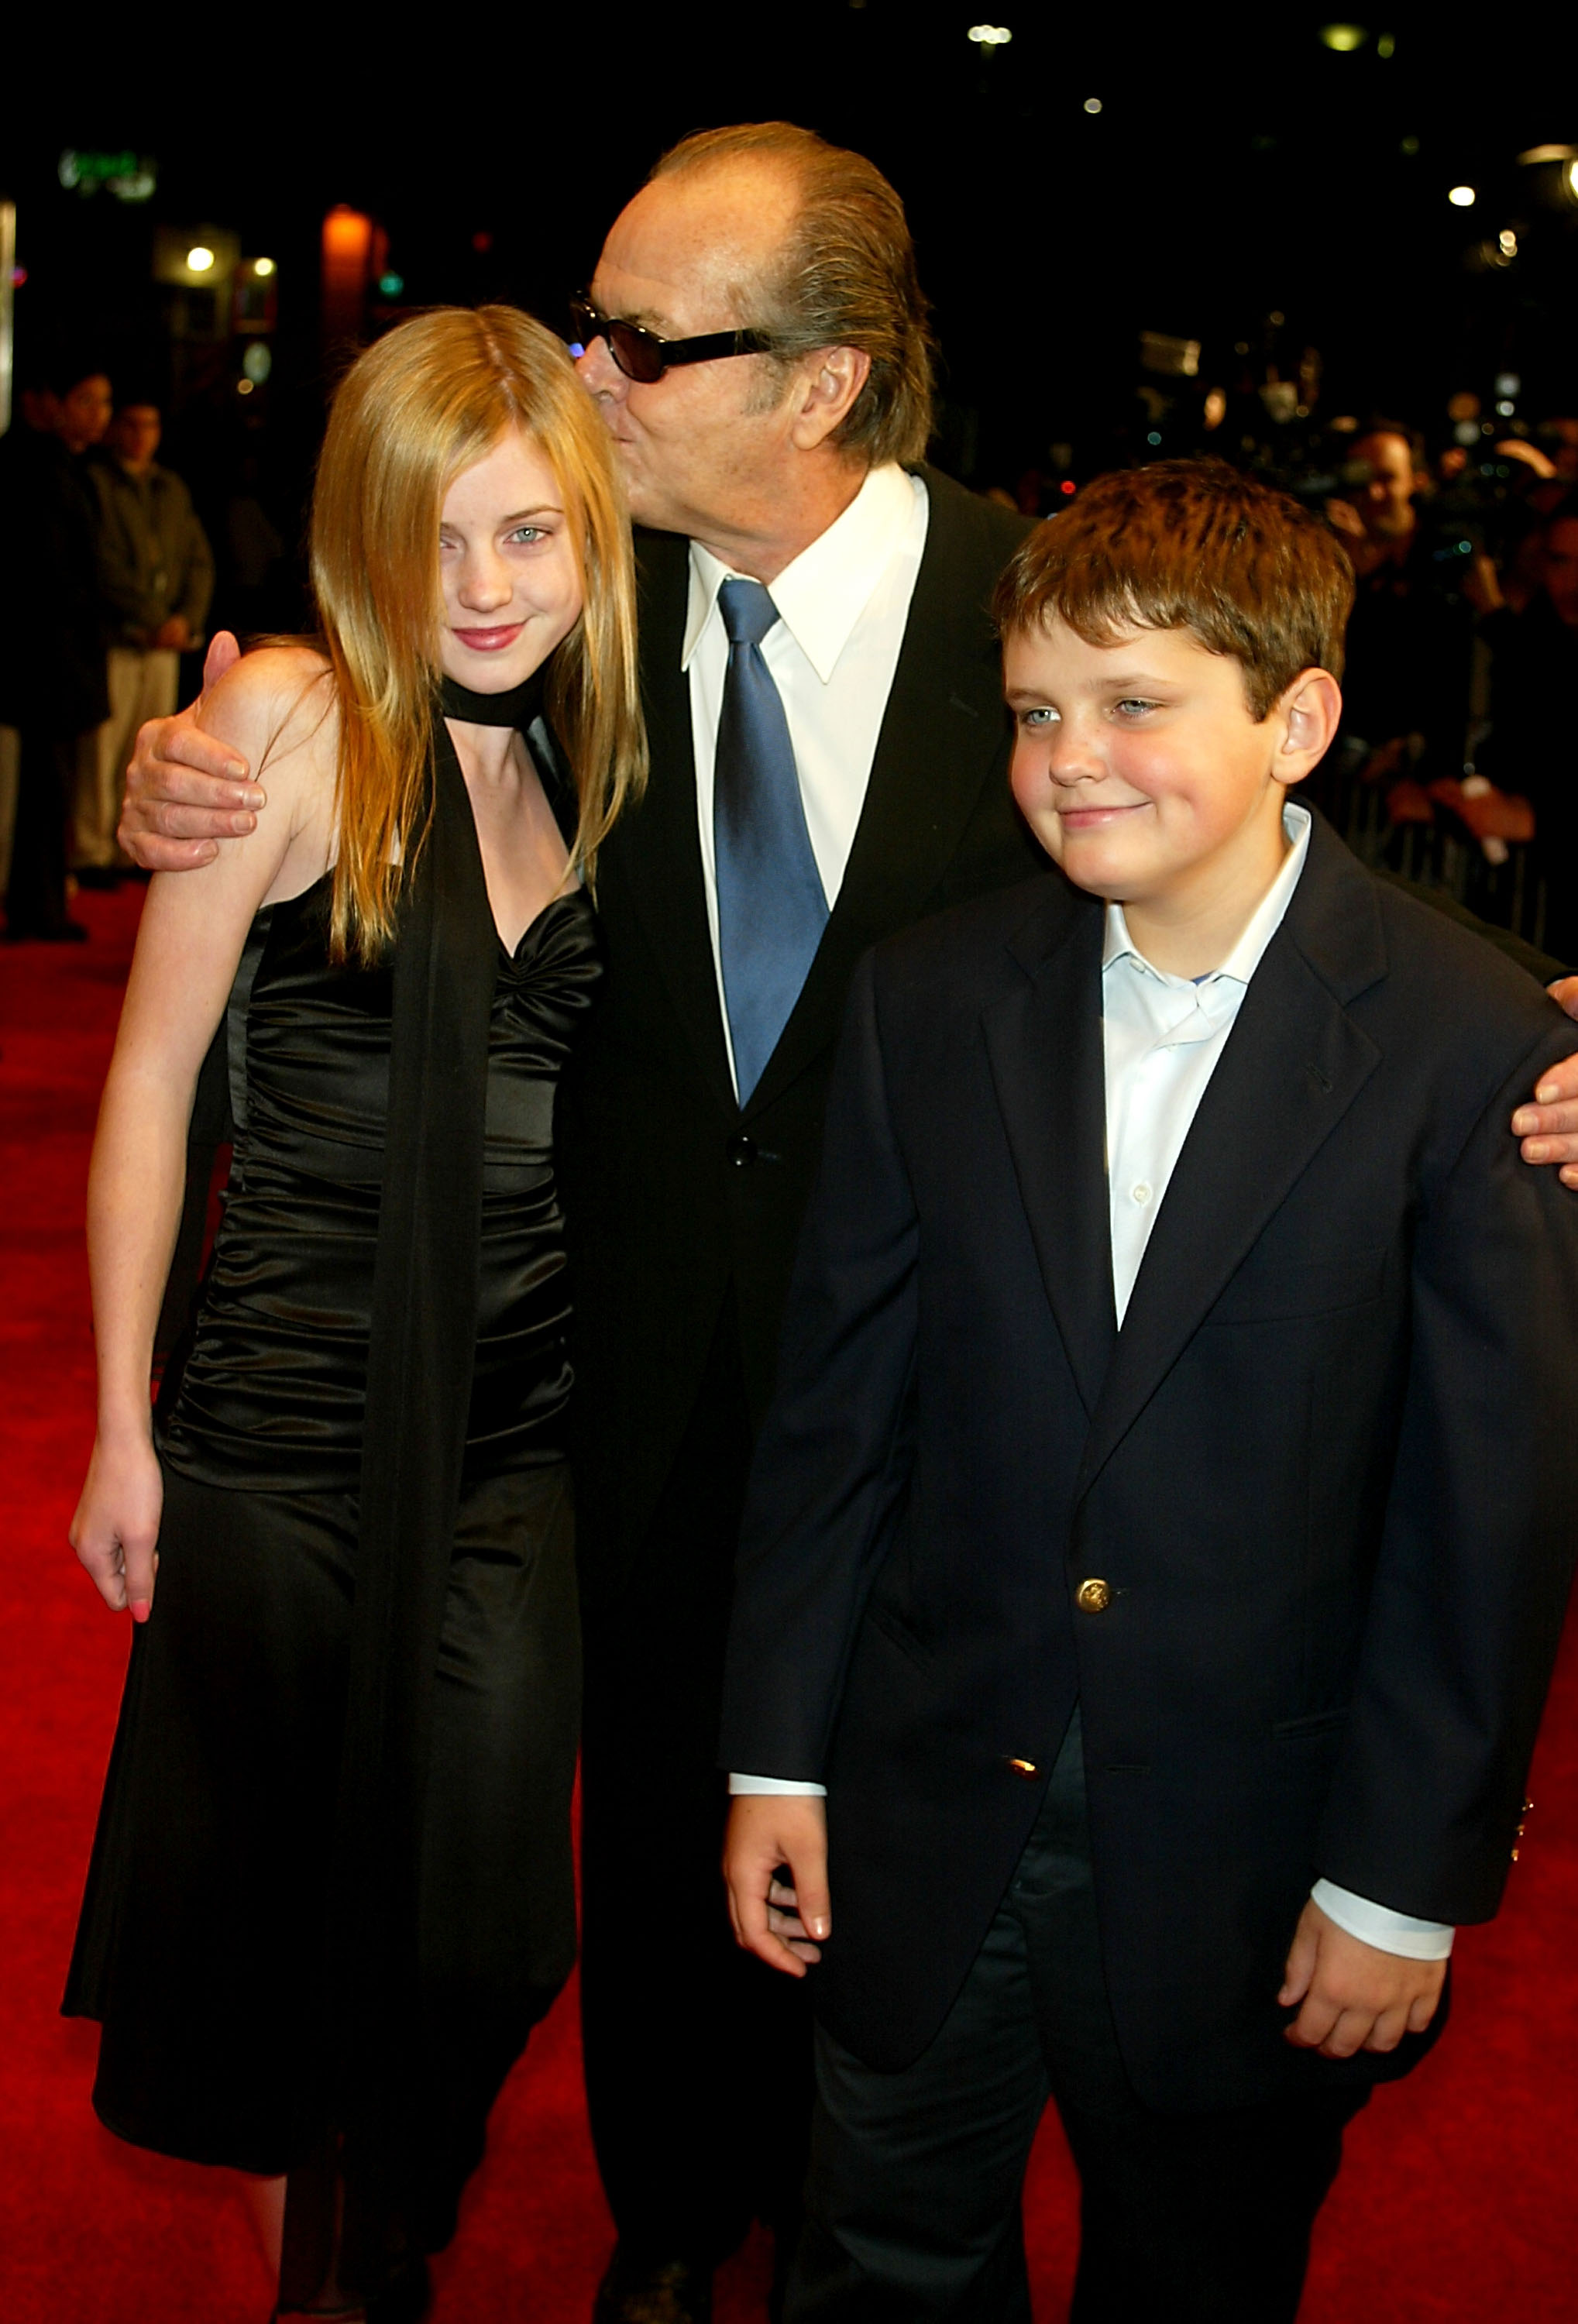 Actor Jack Nicholson with his children Loraine and Raymond, arrives at the Los Angeles premiere of "Something's Gotta Give" at the Mann Village on December 8, 2003, in Westwood, California. | Source: Getty Images